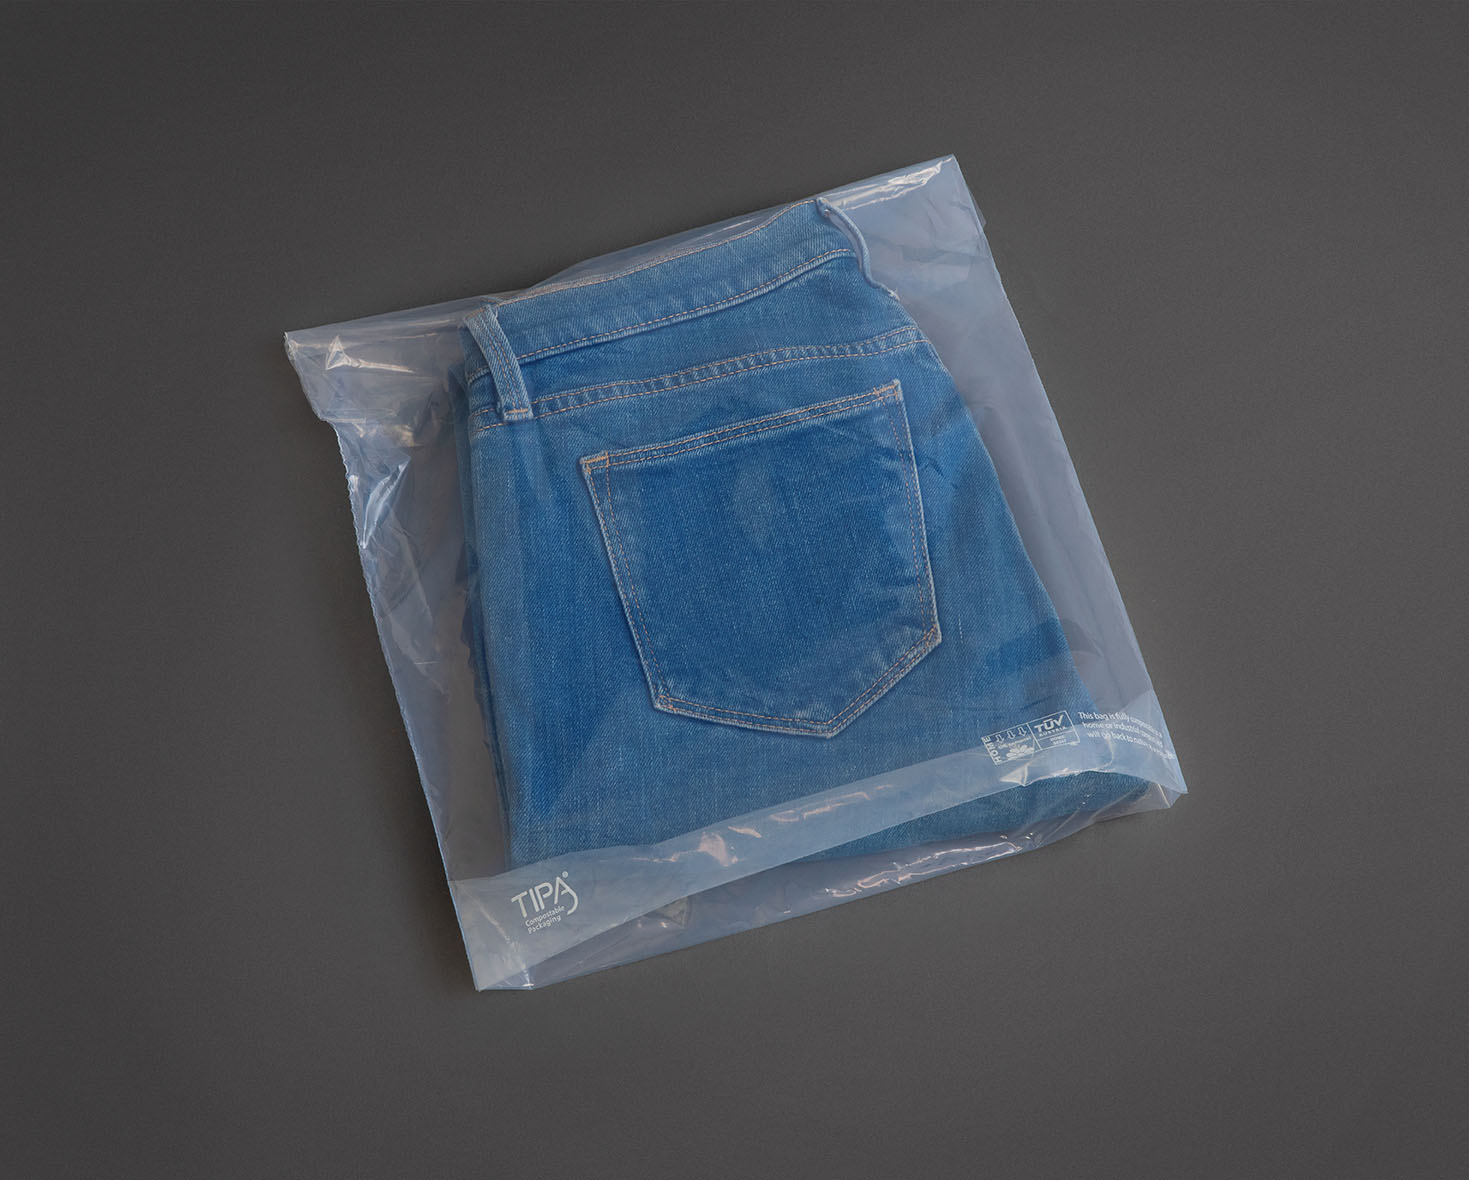 Fashion for Good, C&A, Levi Strauss partner on polybag pilot - Style